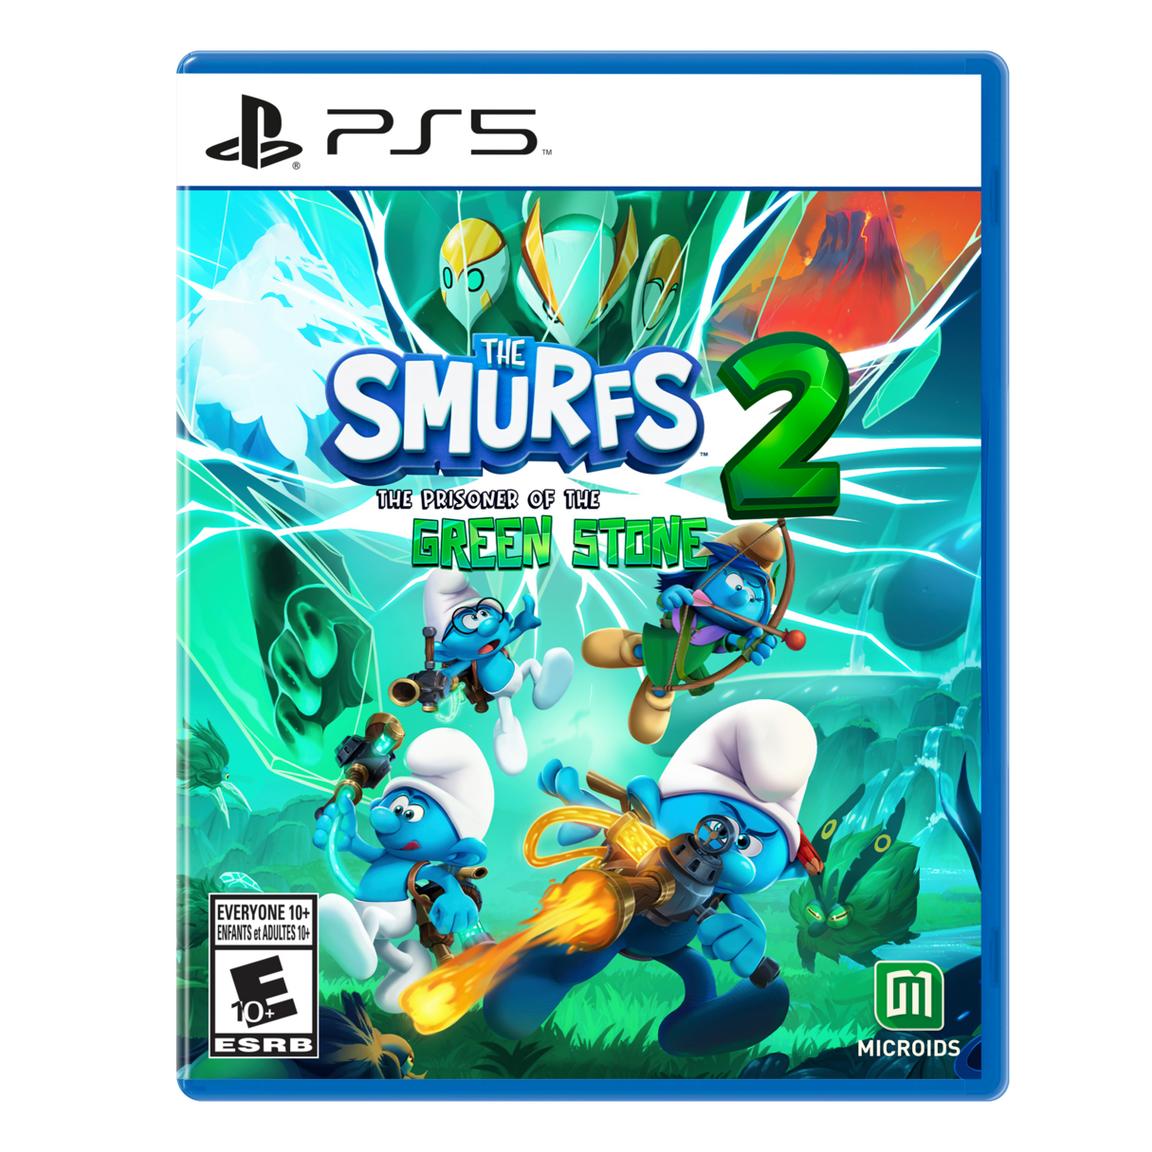 Видеоигра The Smurfs 2: Prisoner of the Green Stone - PlayStation 5 ps5 игра microids tintin reporter cigars of the pharaoh ли